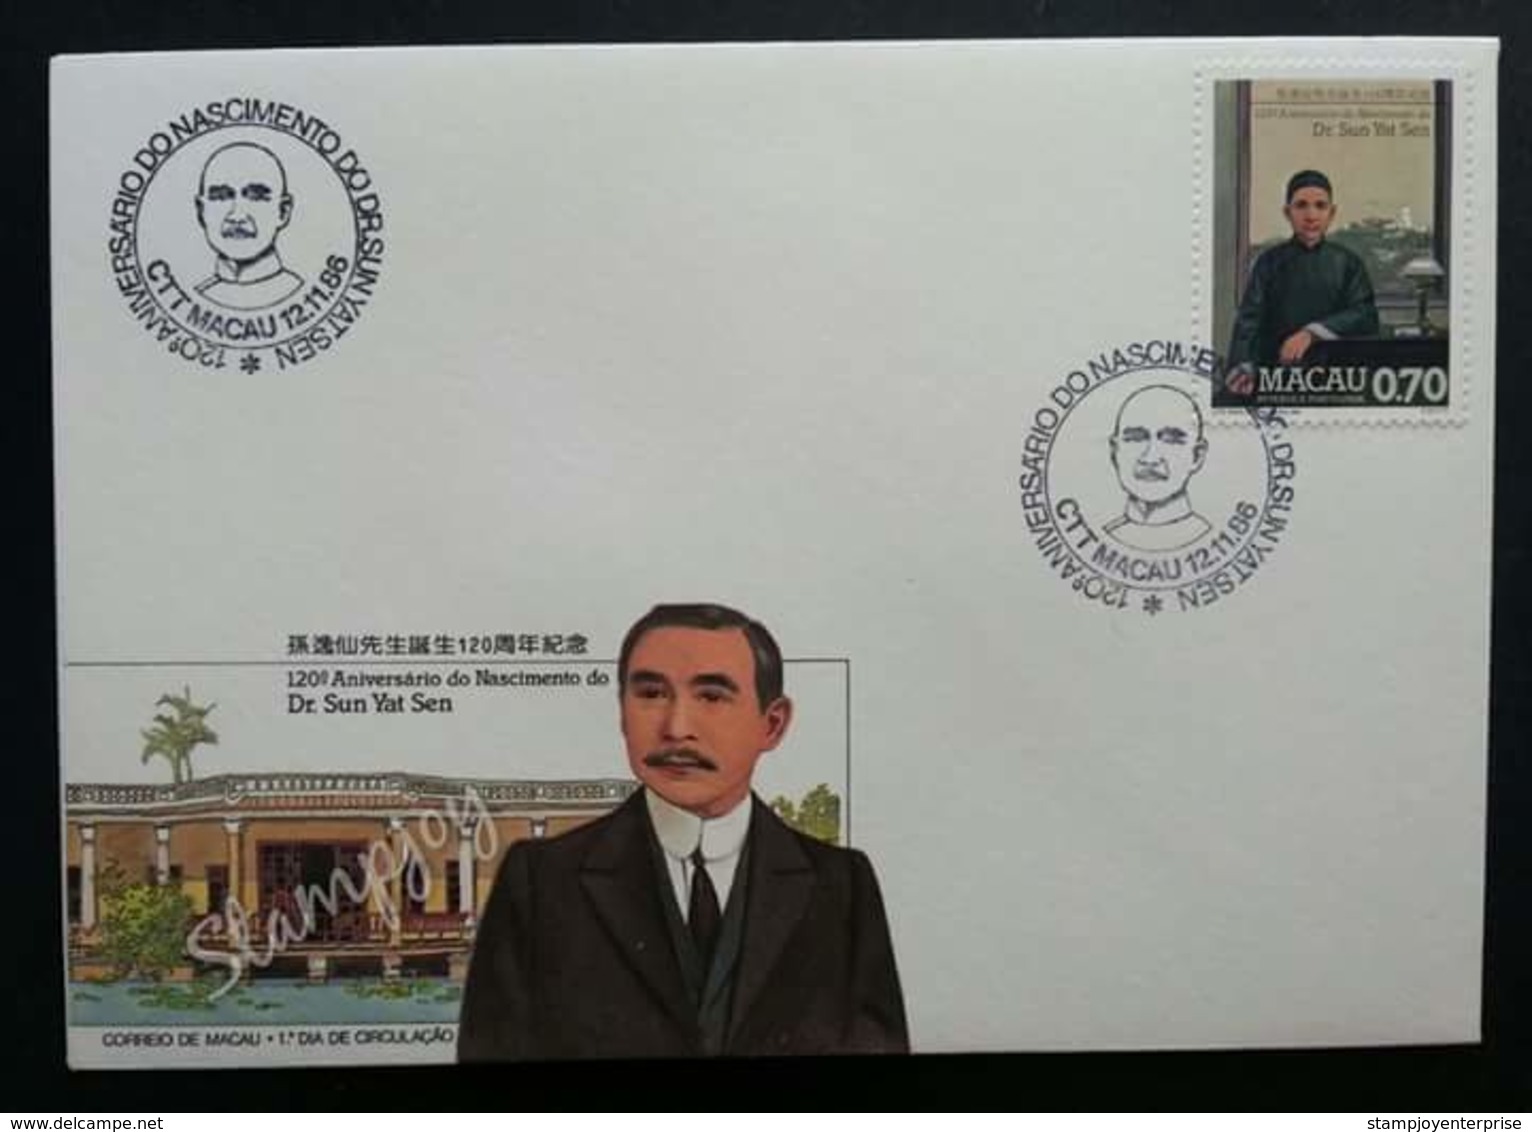 Macau Macao China 120th Anniversary Of Dr. Sun Yat Sen 1986 (stamp FDC) - Covers & Documents